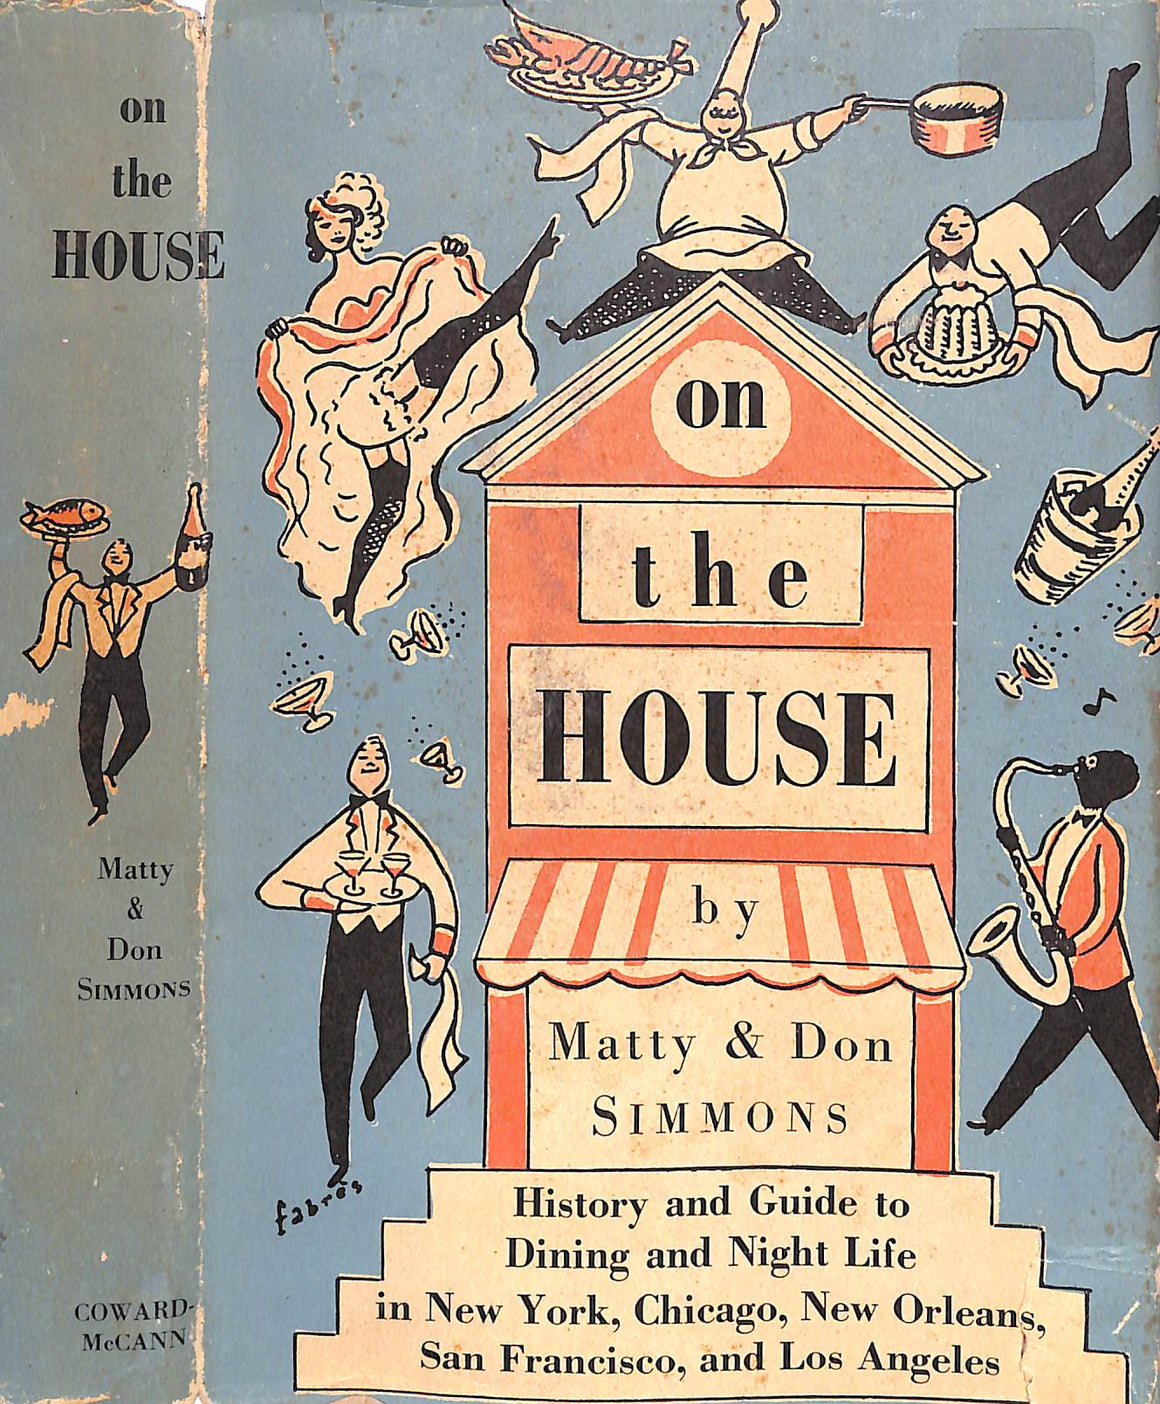 "On The House" 1955 SIMMONS, Matty & Don